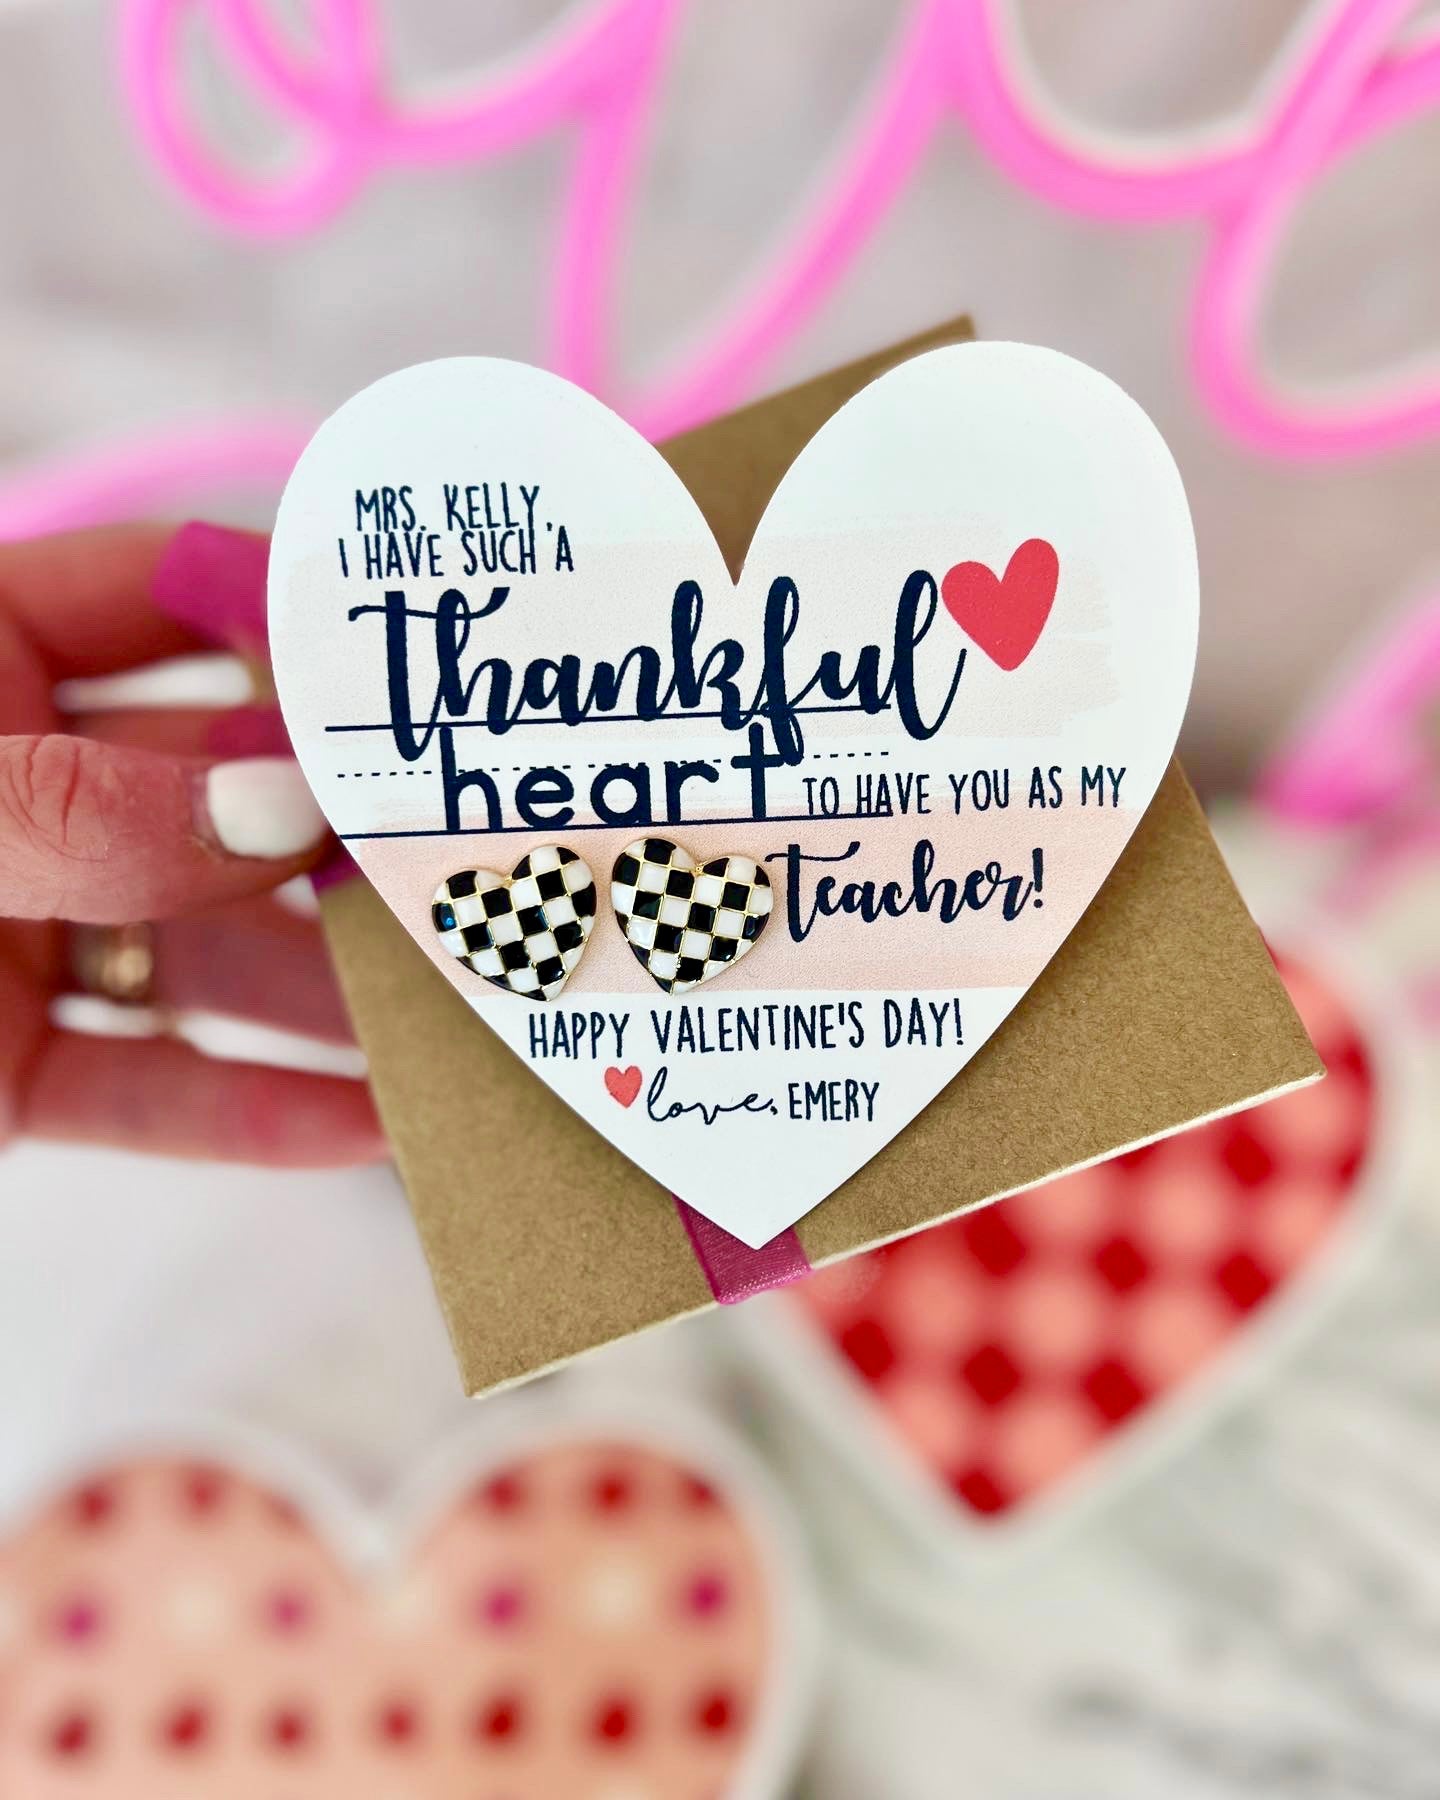 Teacher Valentine's Day gift, Thanks for being the best teacher, Valentine's day heart studs, teacher gift, personalized card, box & ribbon!